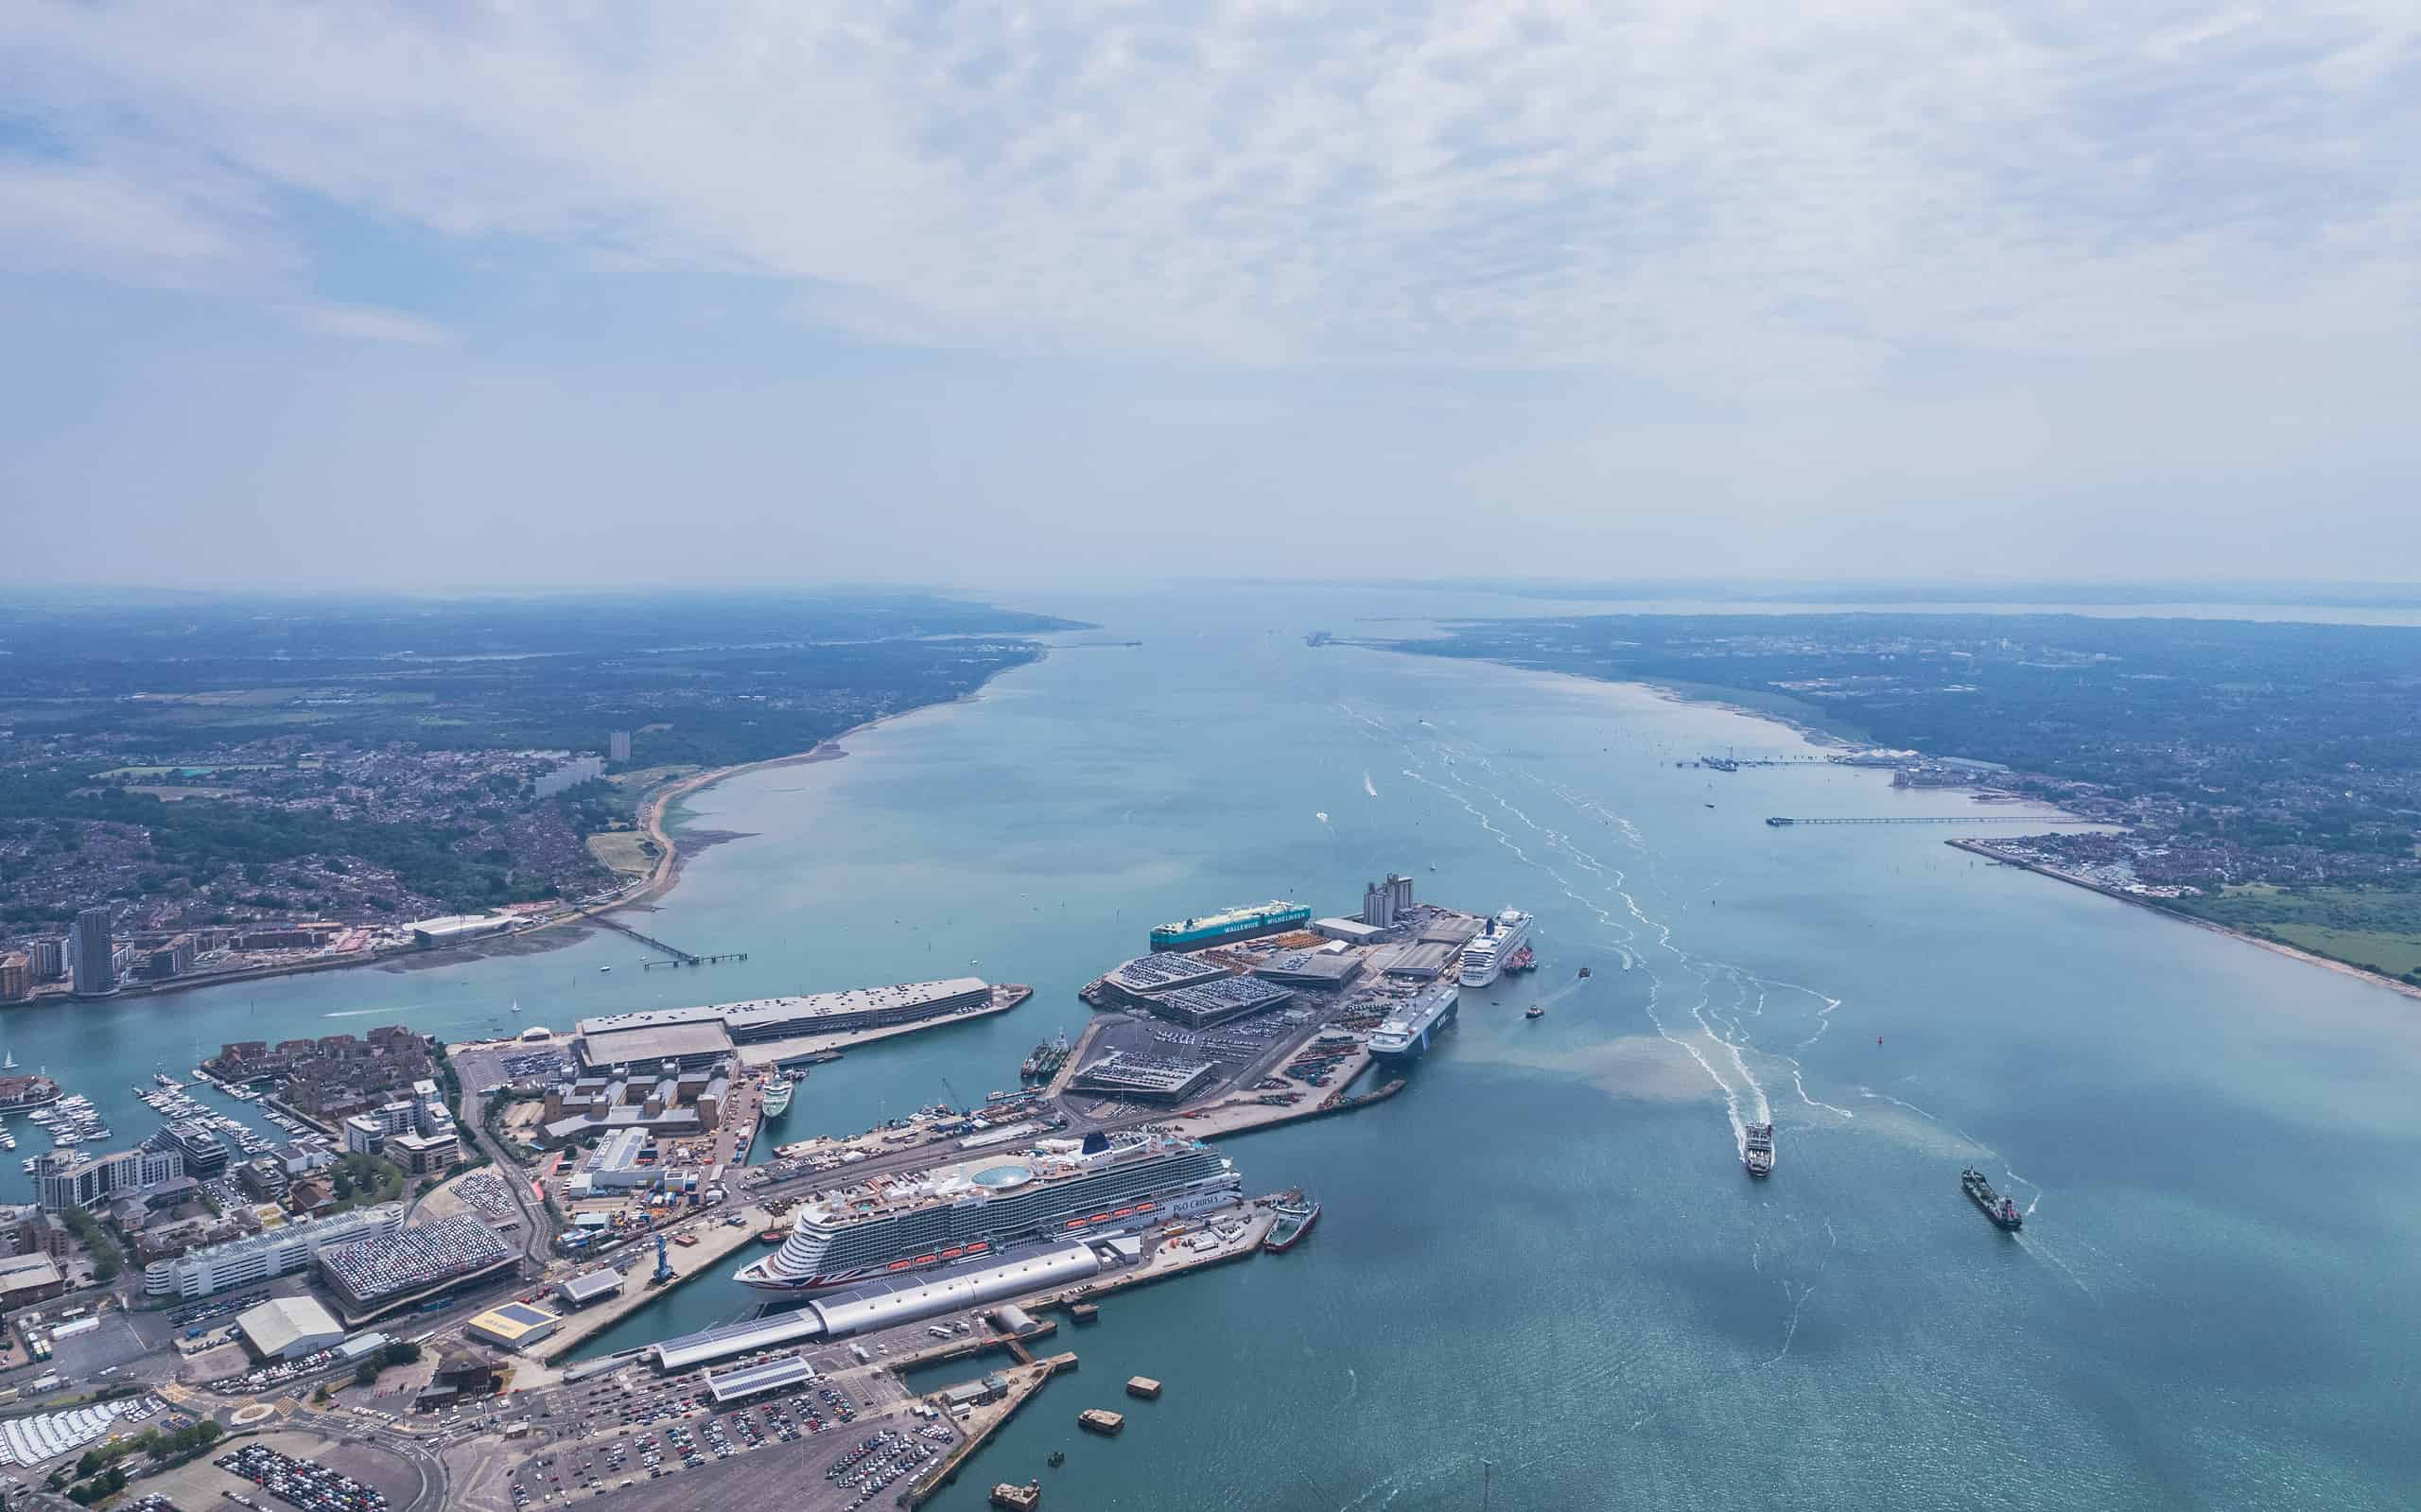 The epic aerial view of the port, dock, shipyard of the Southampton